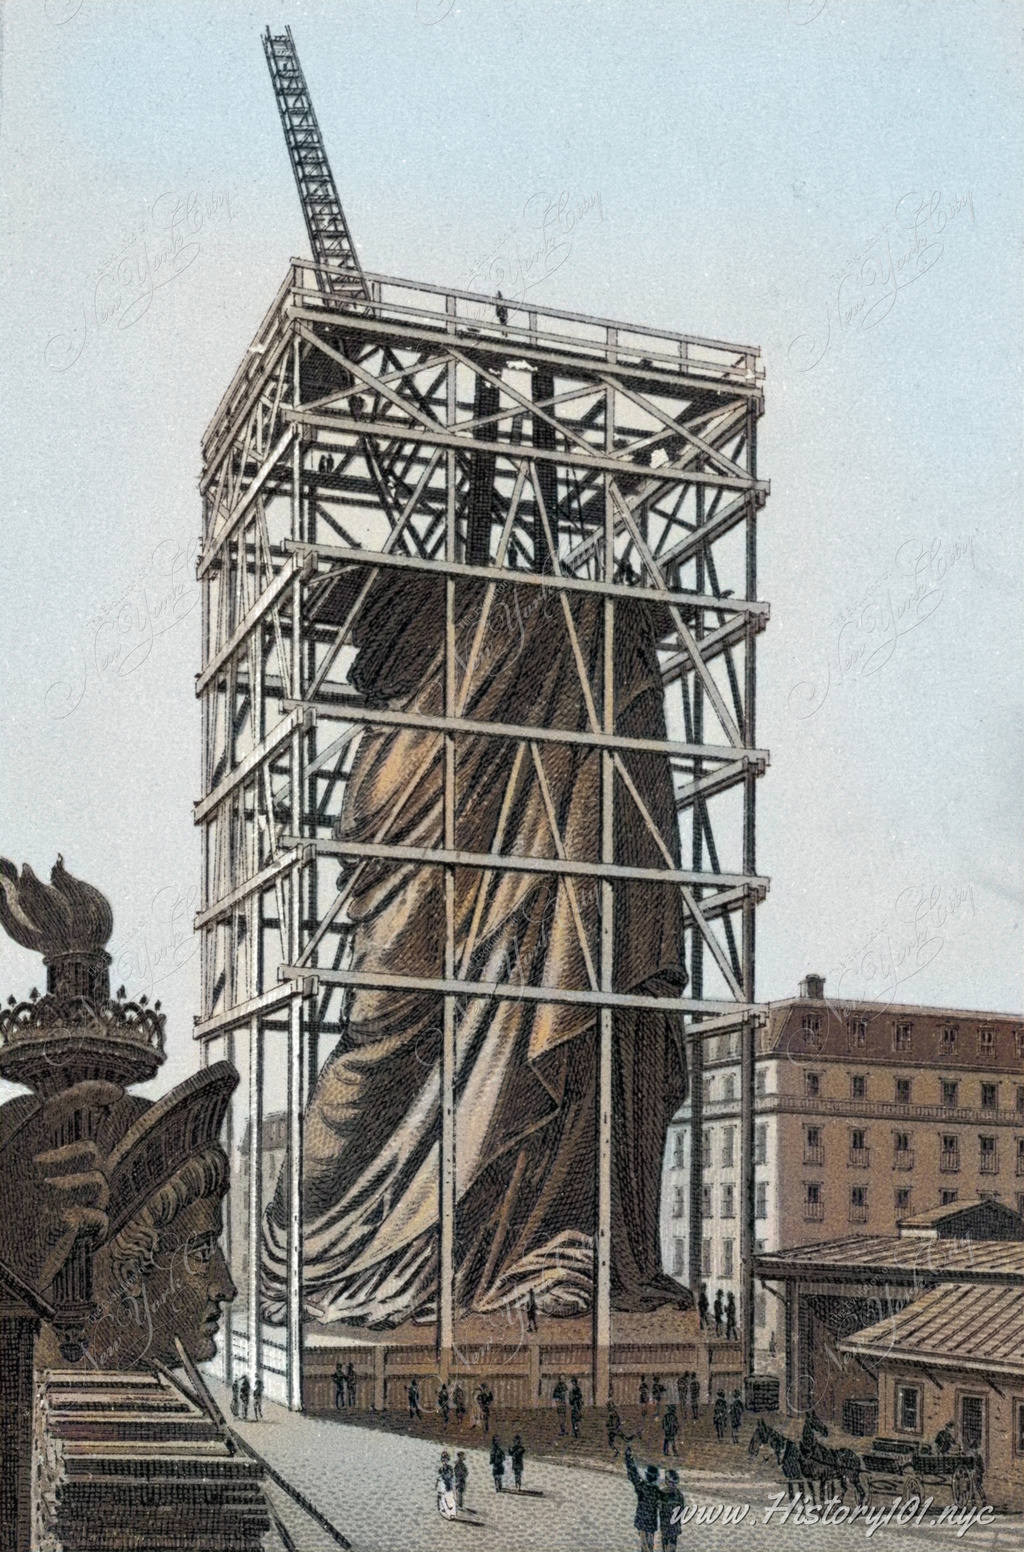 In the bustling streets of Paris in 1887, a monumental endeavor was underway - the construction of the iconic Statue of Liberty. 